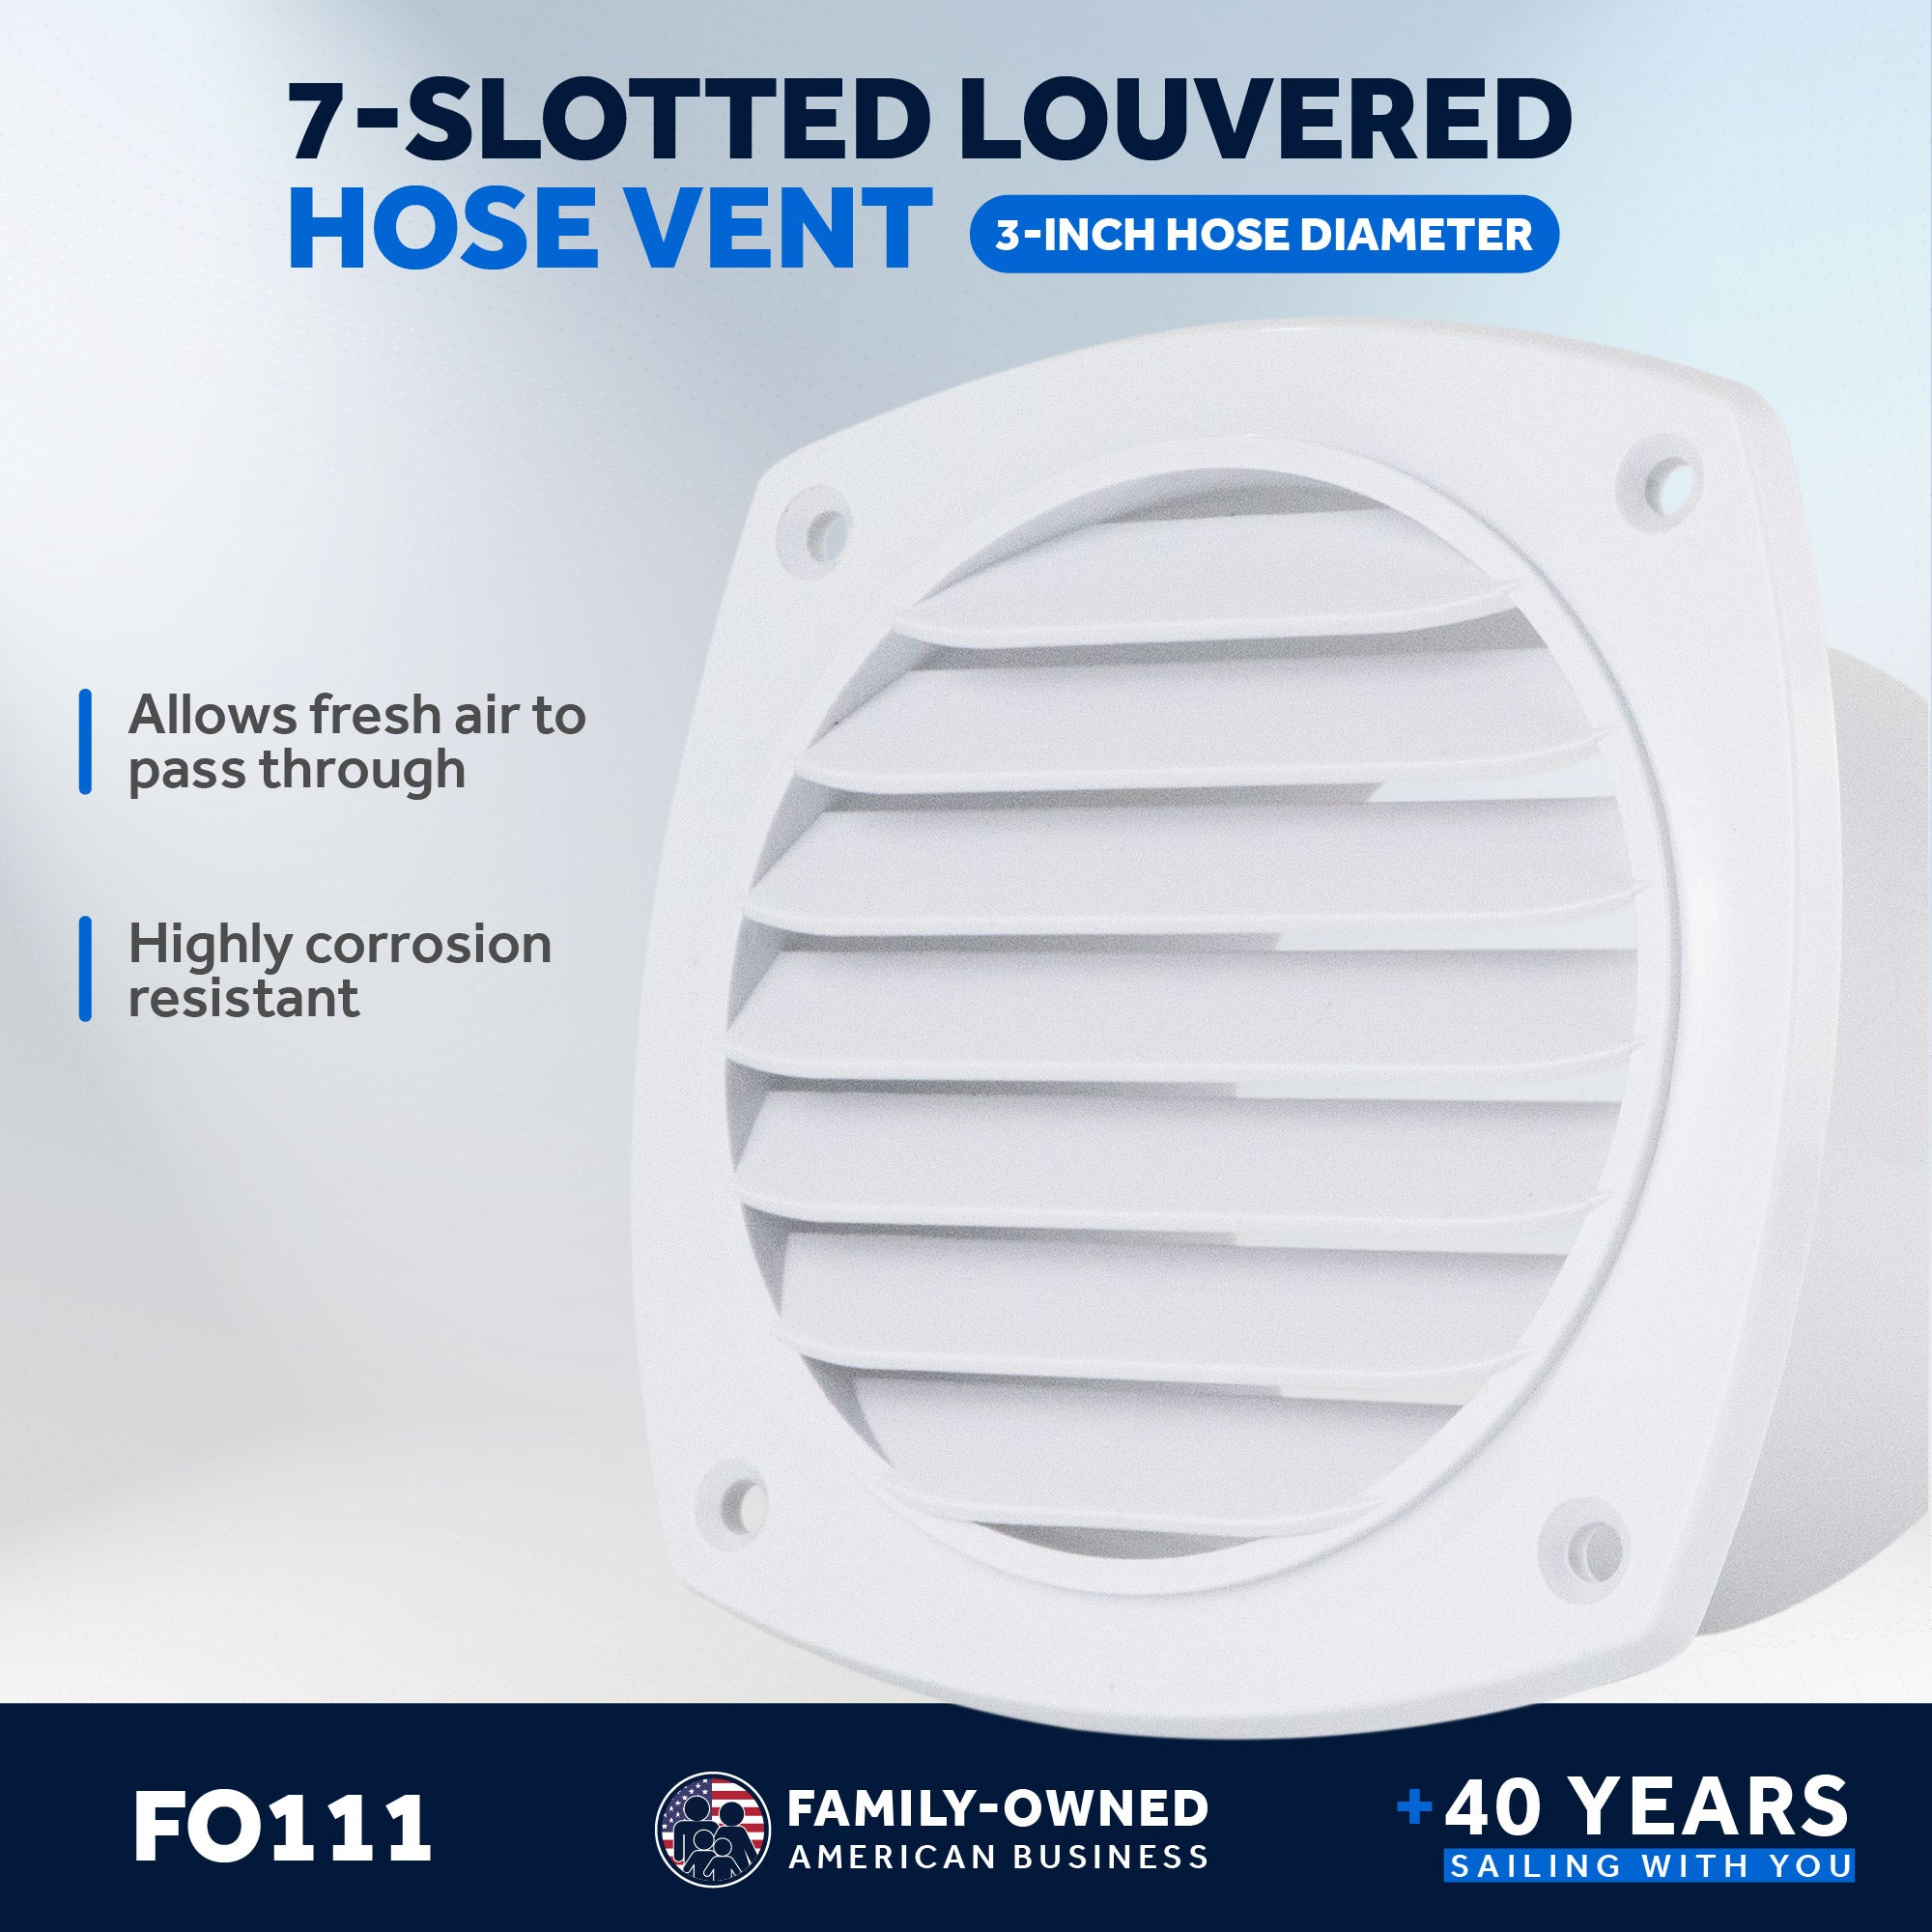 7-Slotted Louvered Hose Vent, 4-inch Hose Diameter, White - FO111